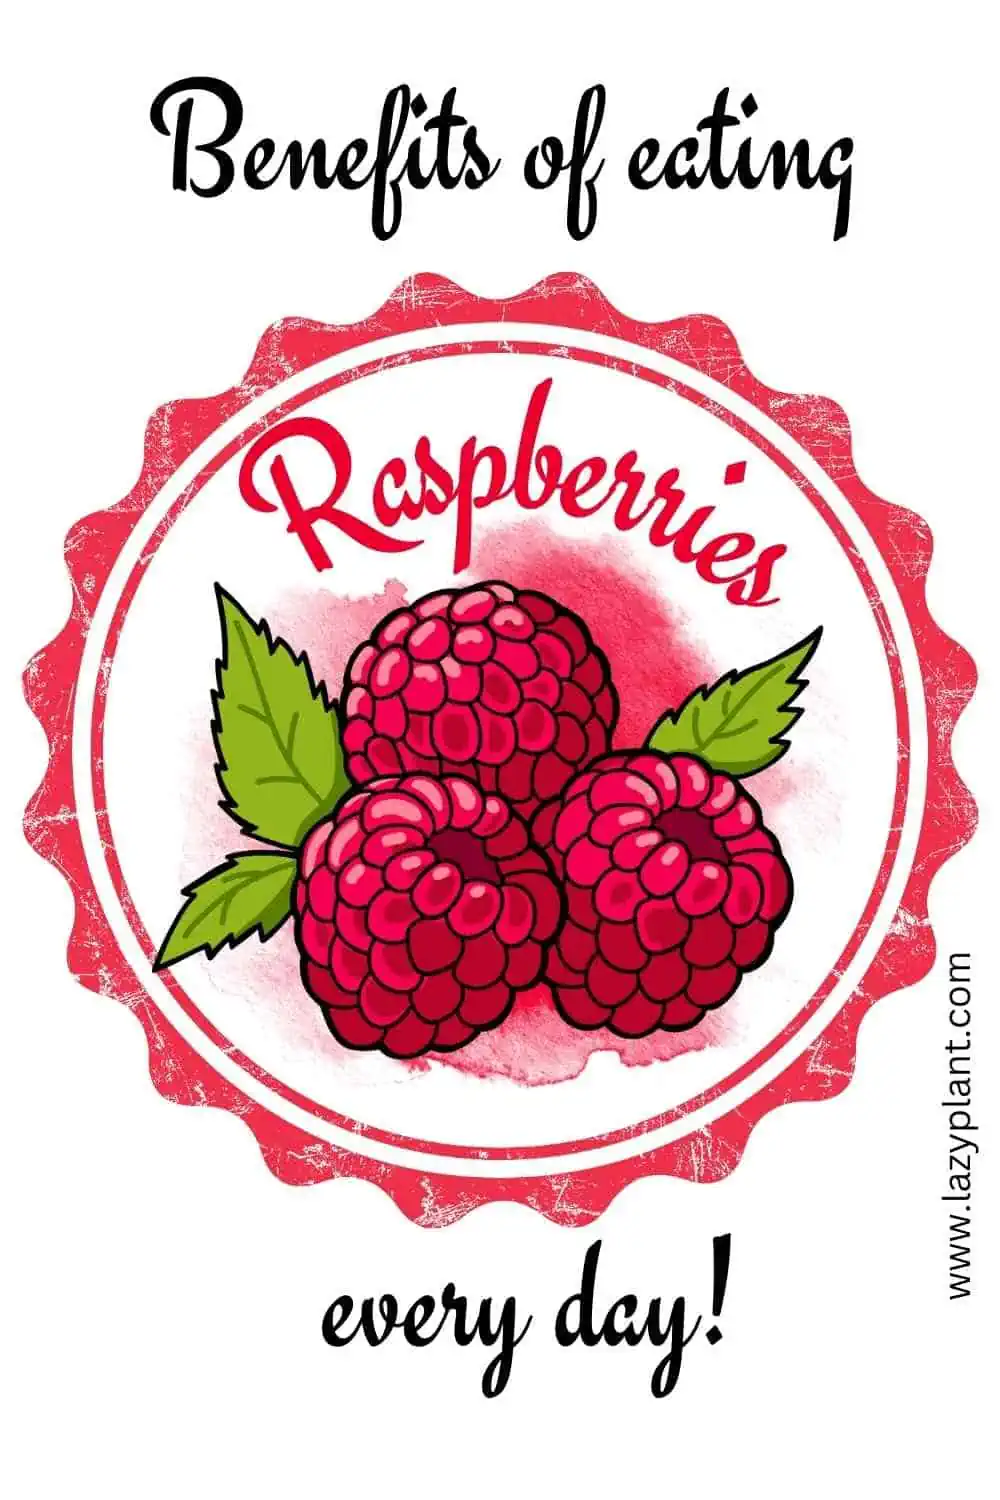 Eat 1 cup of raw raspberries every day for weight loss & good health